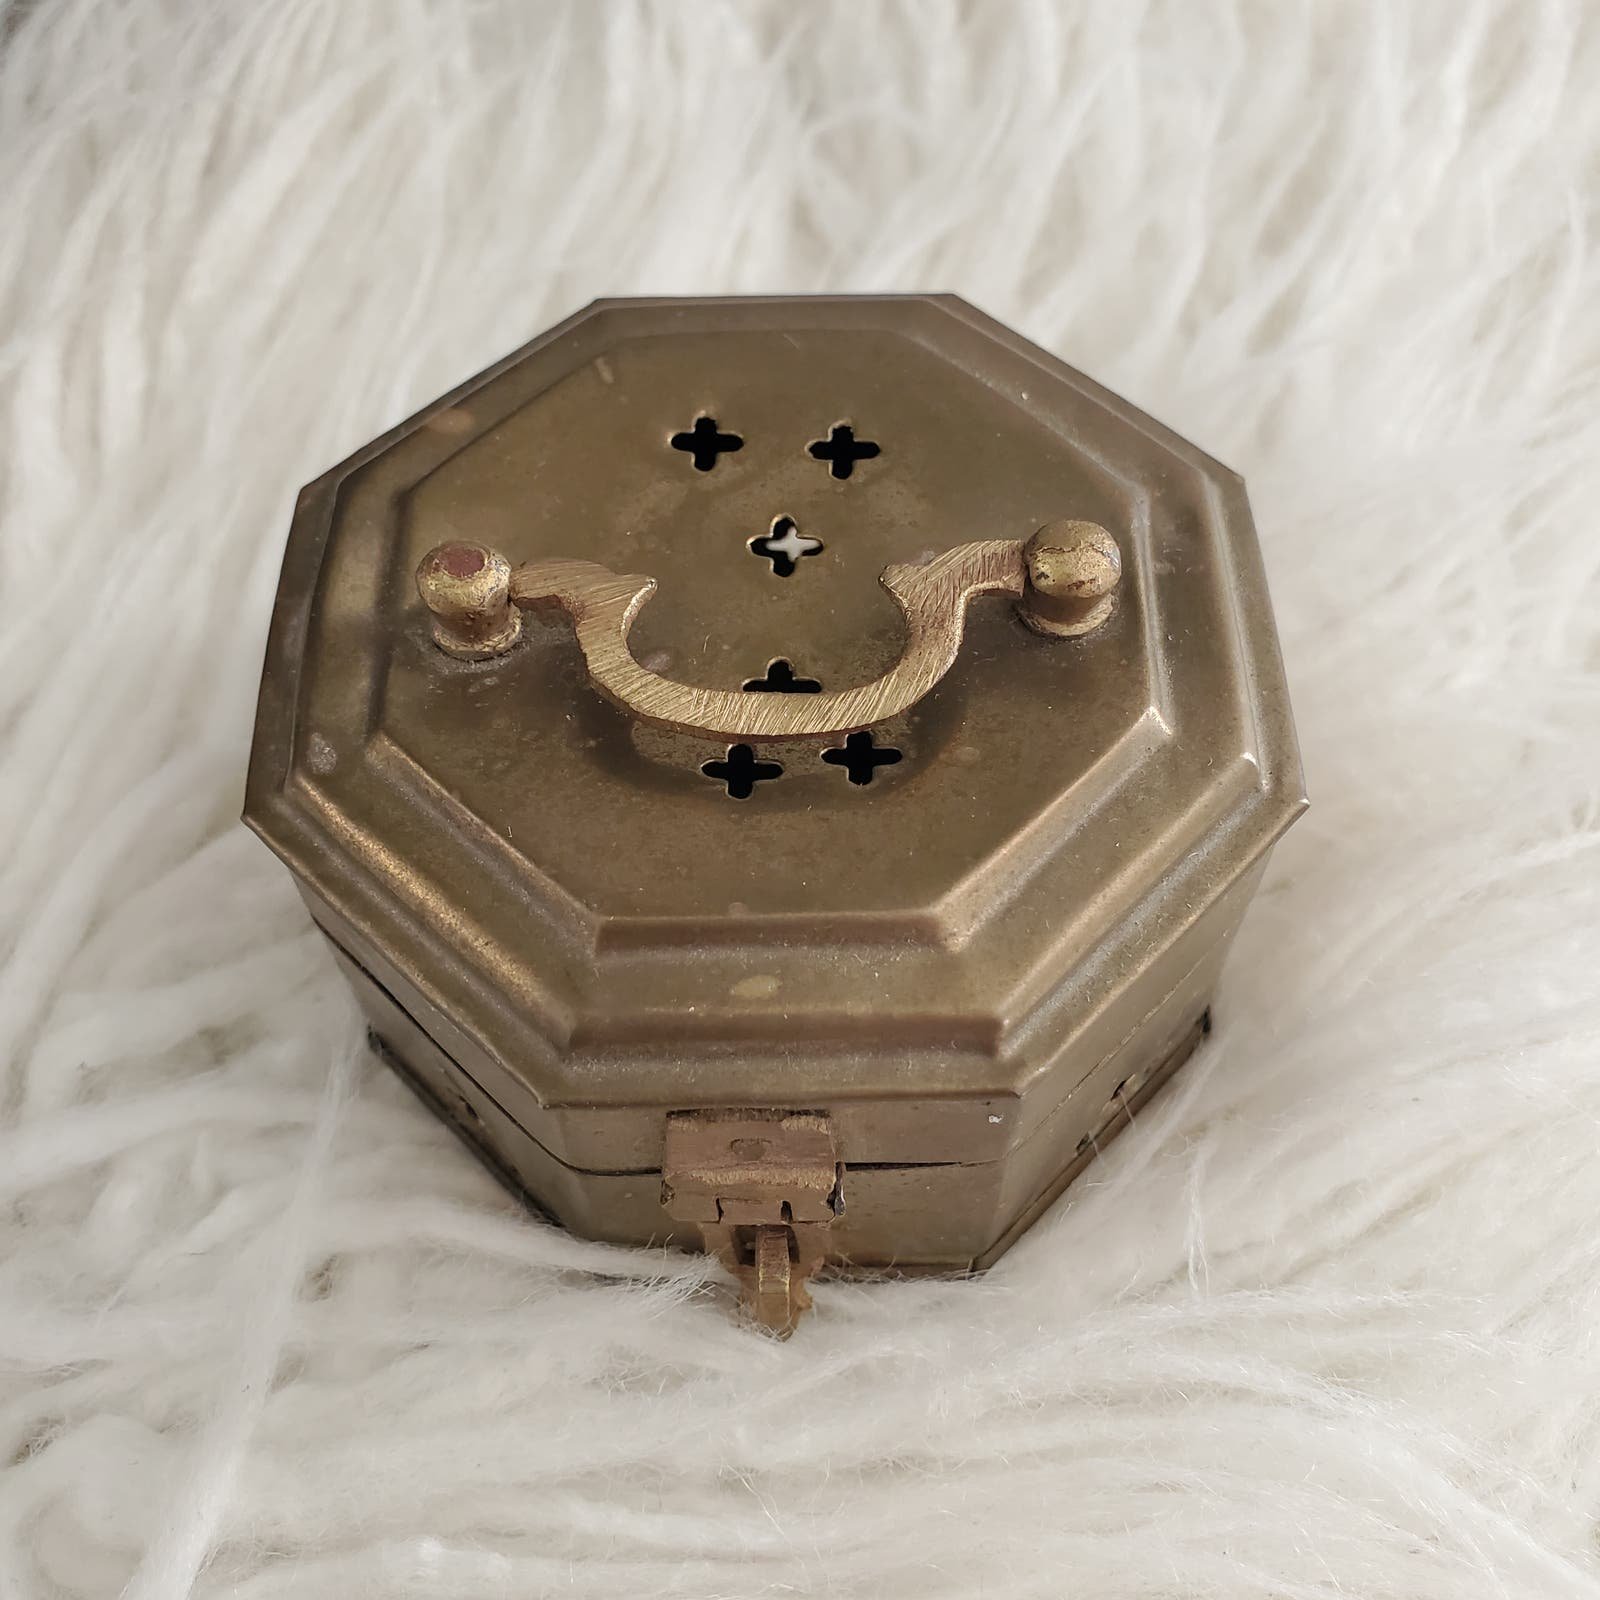 Solid Brass Vintage Hinged Cricket Box Cage k2hIRjCyb